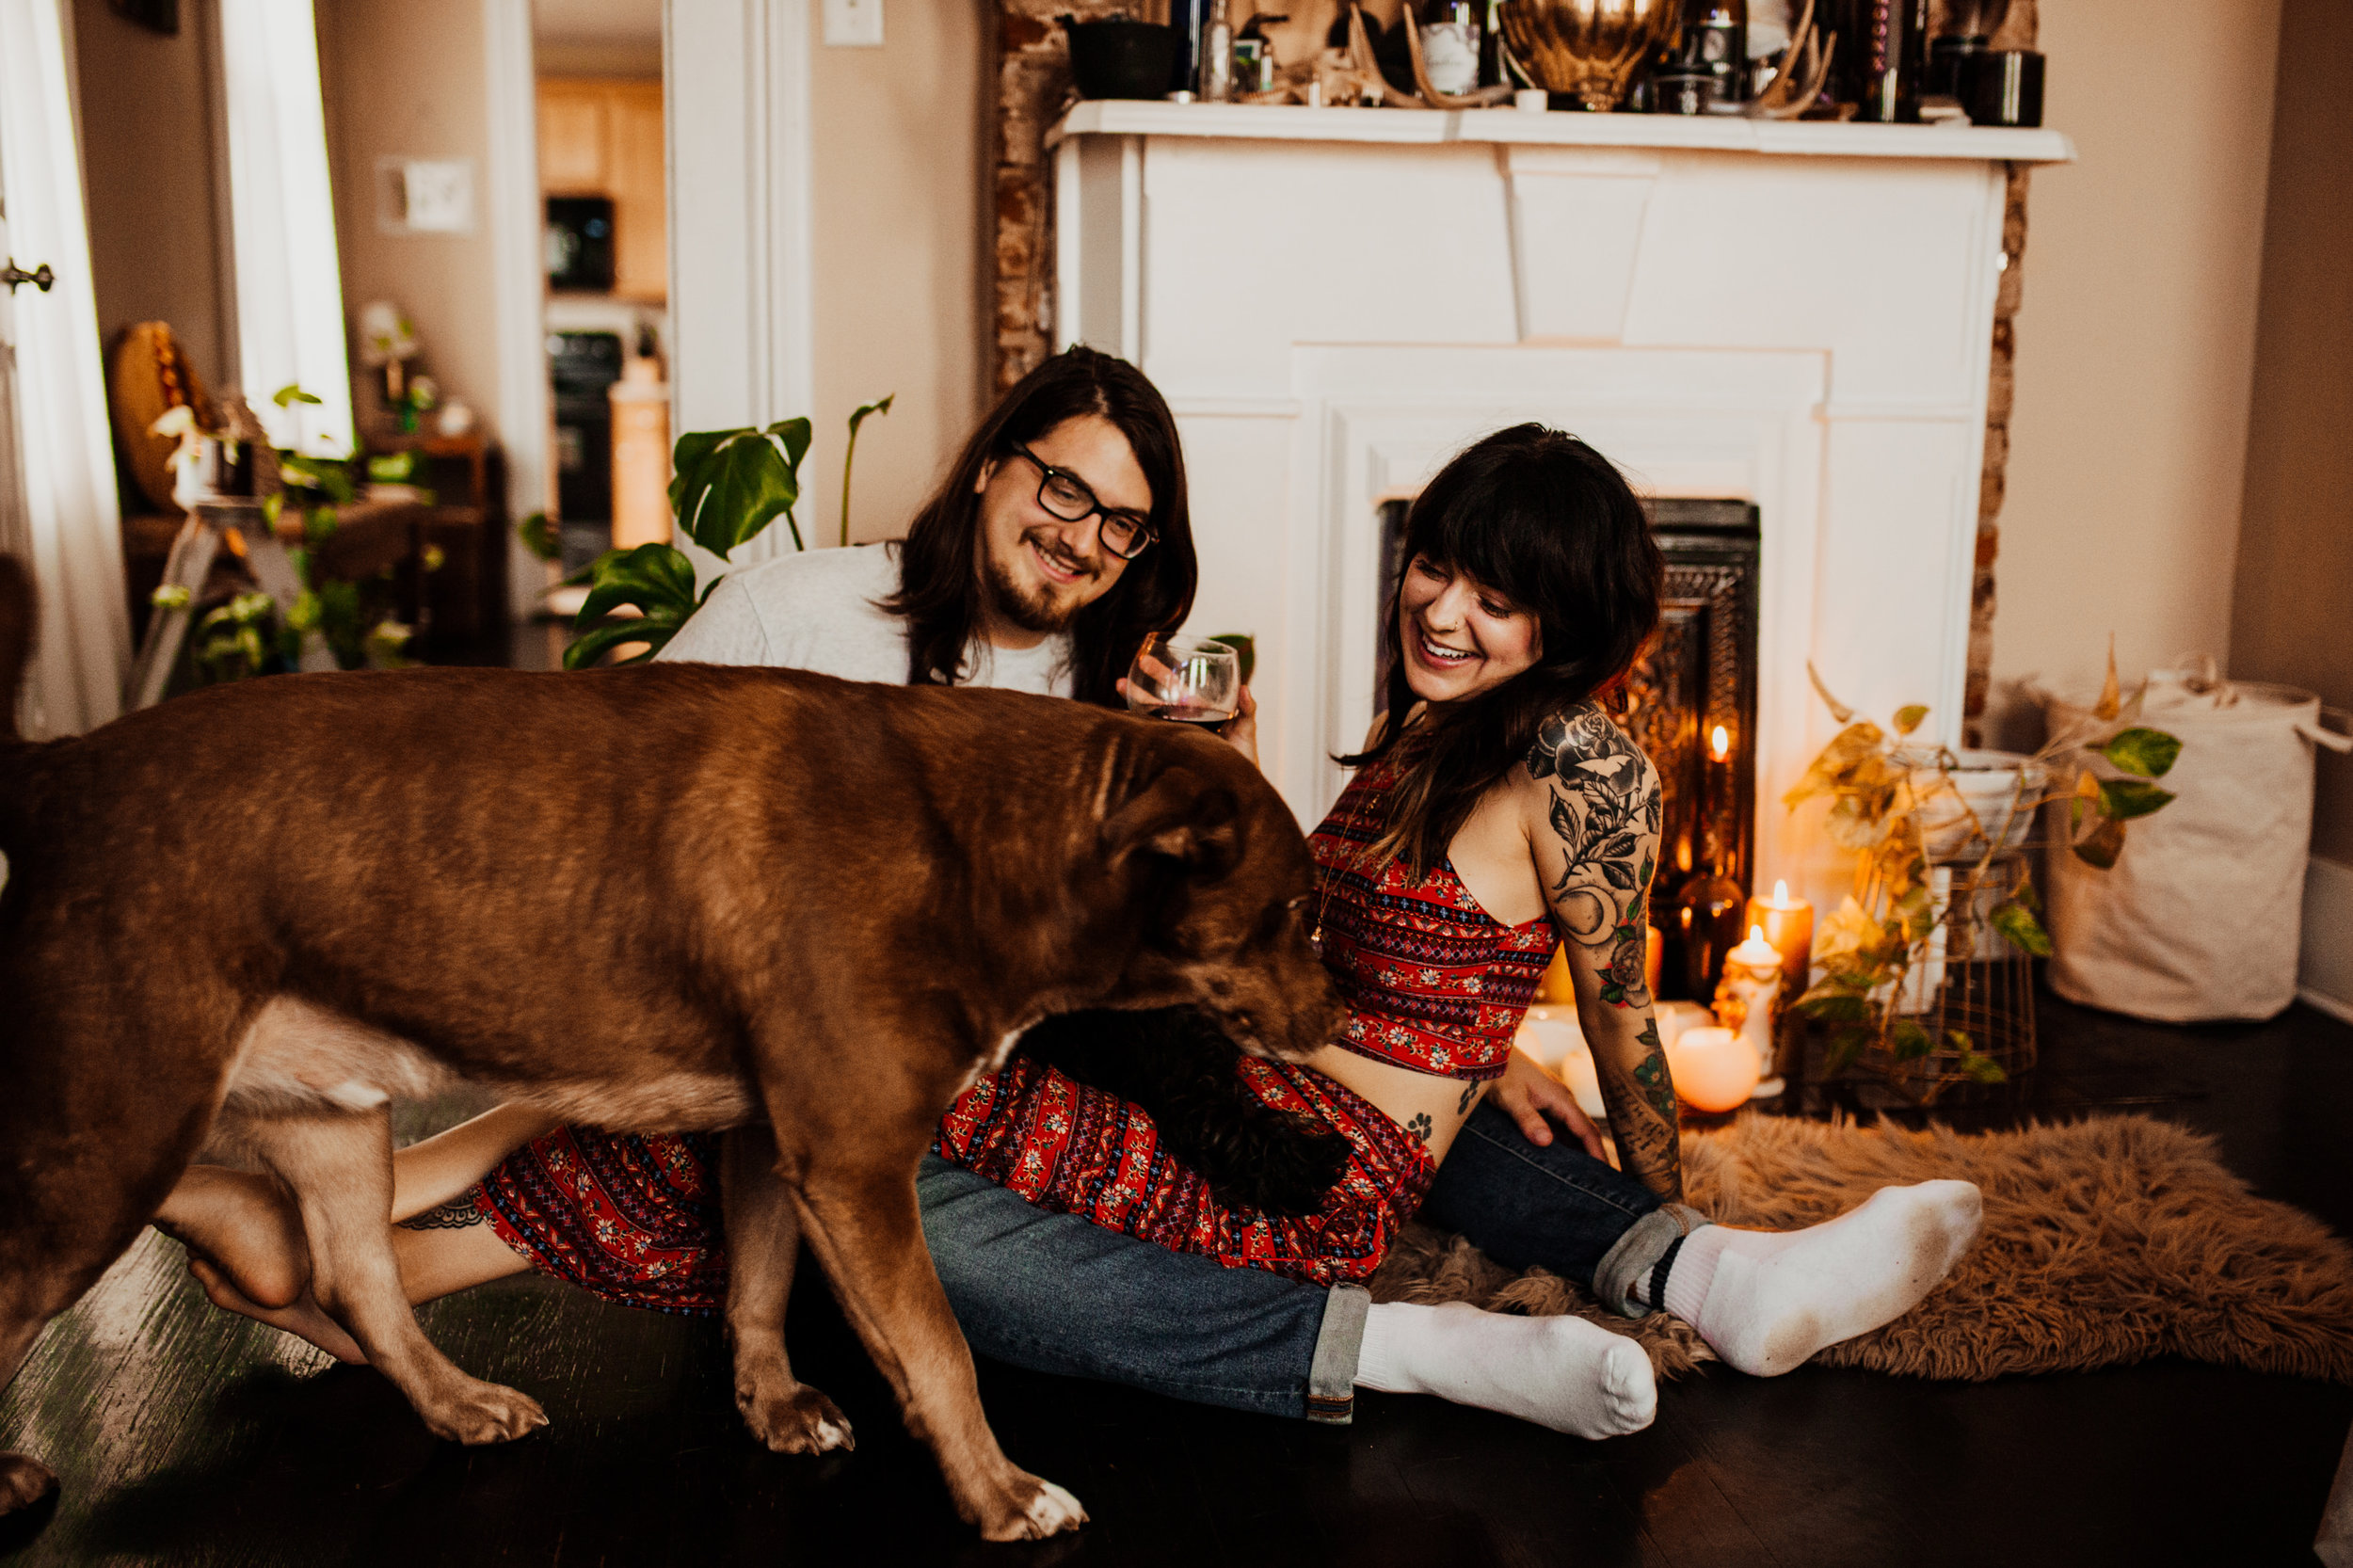 louisville-photographer-engagement-photos-in-home-session-kentucky (43 of 73).jpg